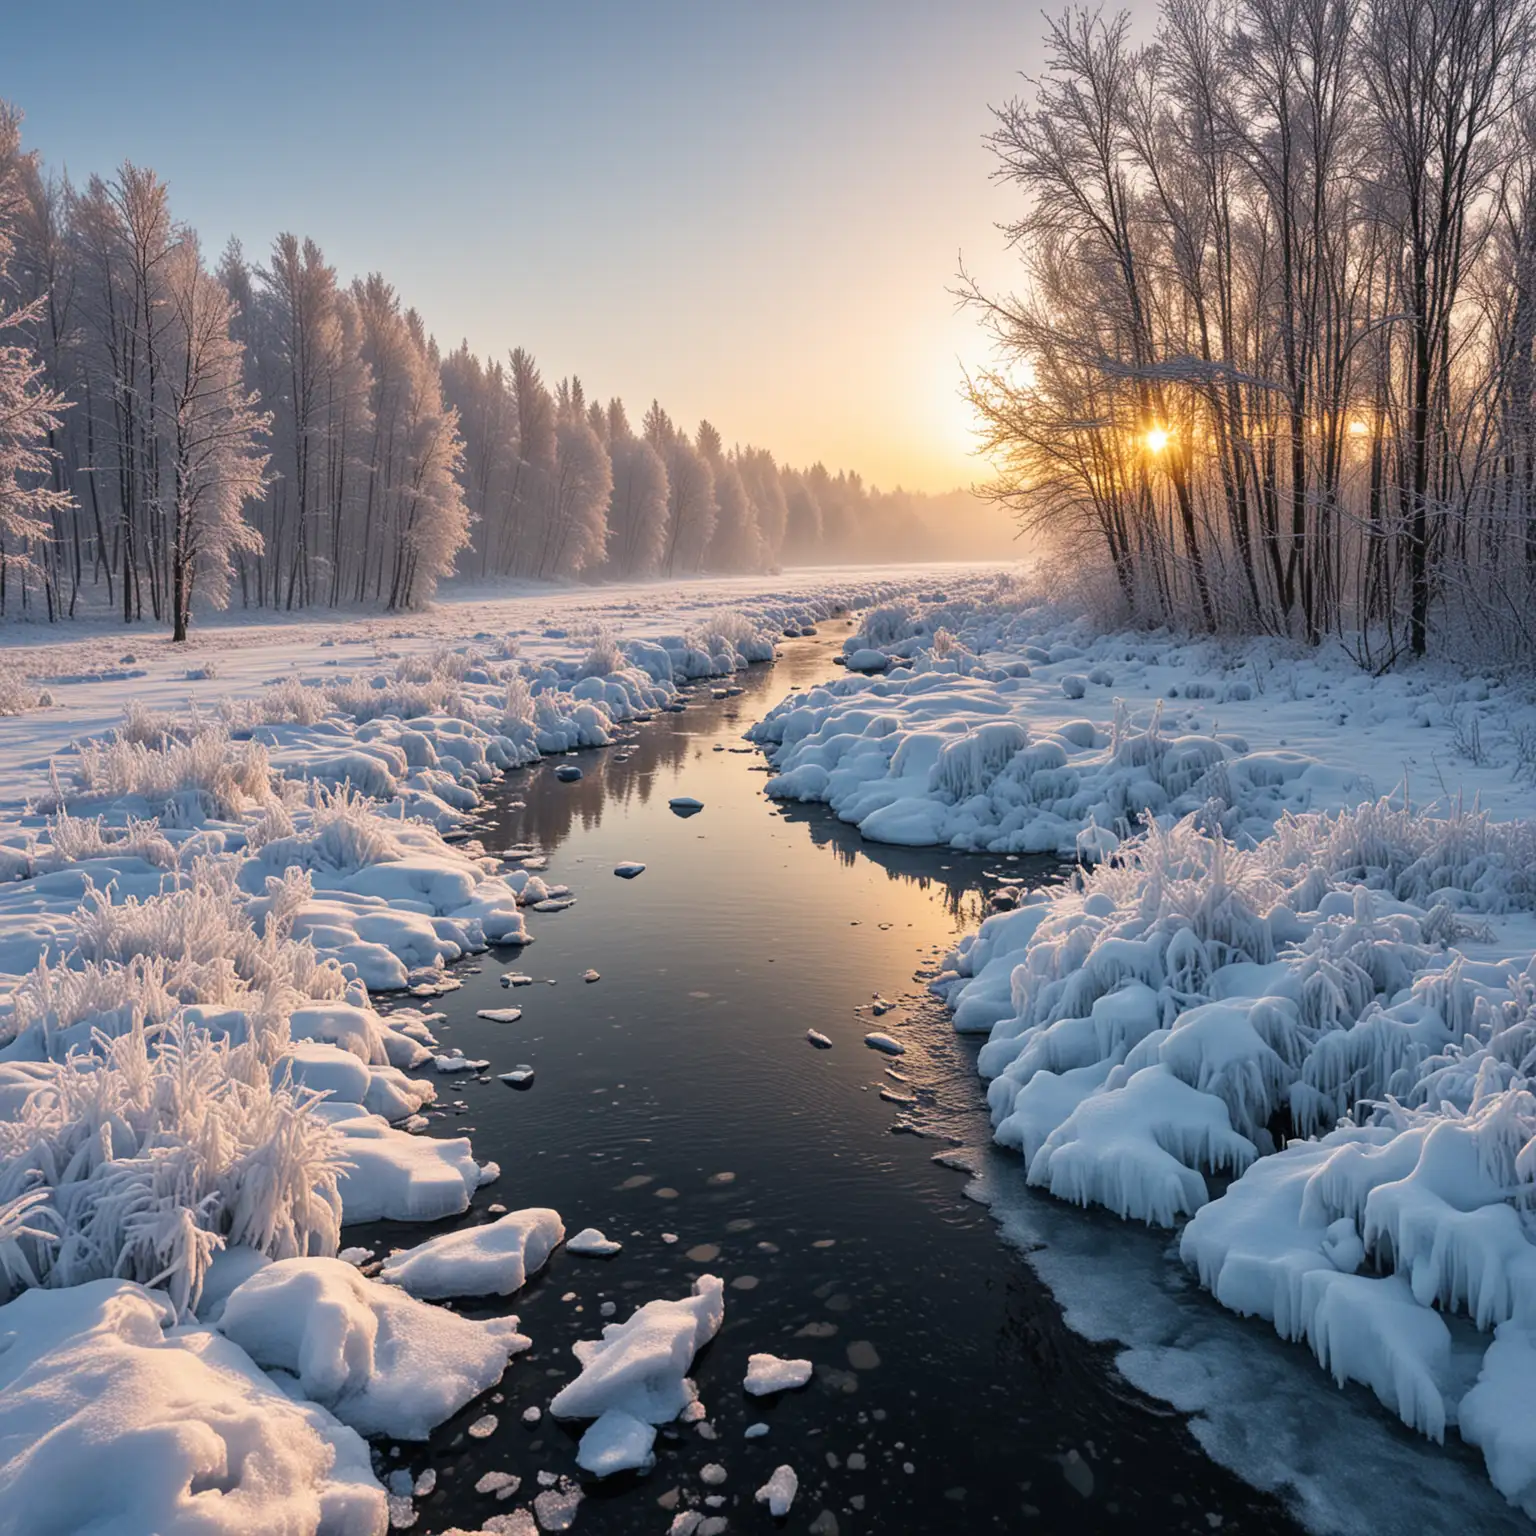 Charming Winter Scene Snow and Ice Landscape